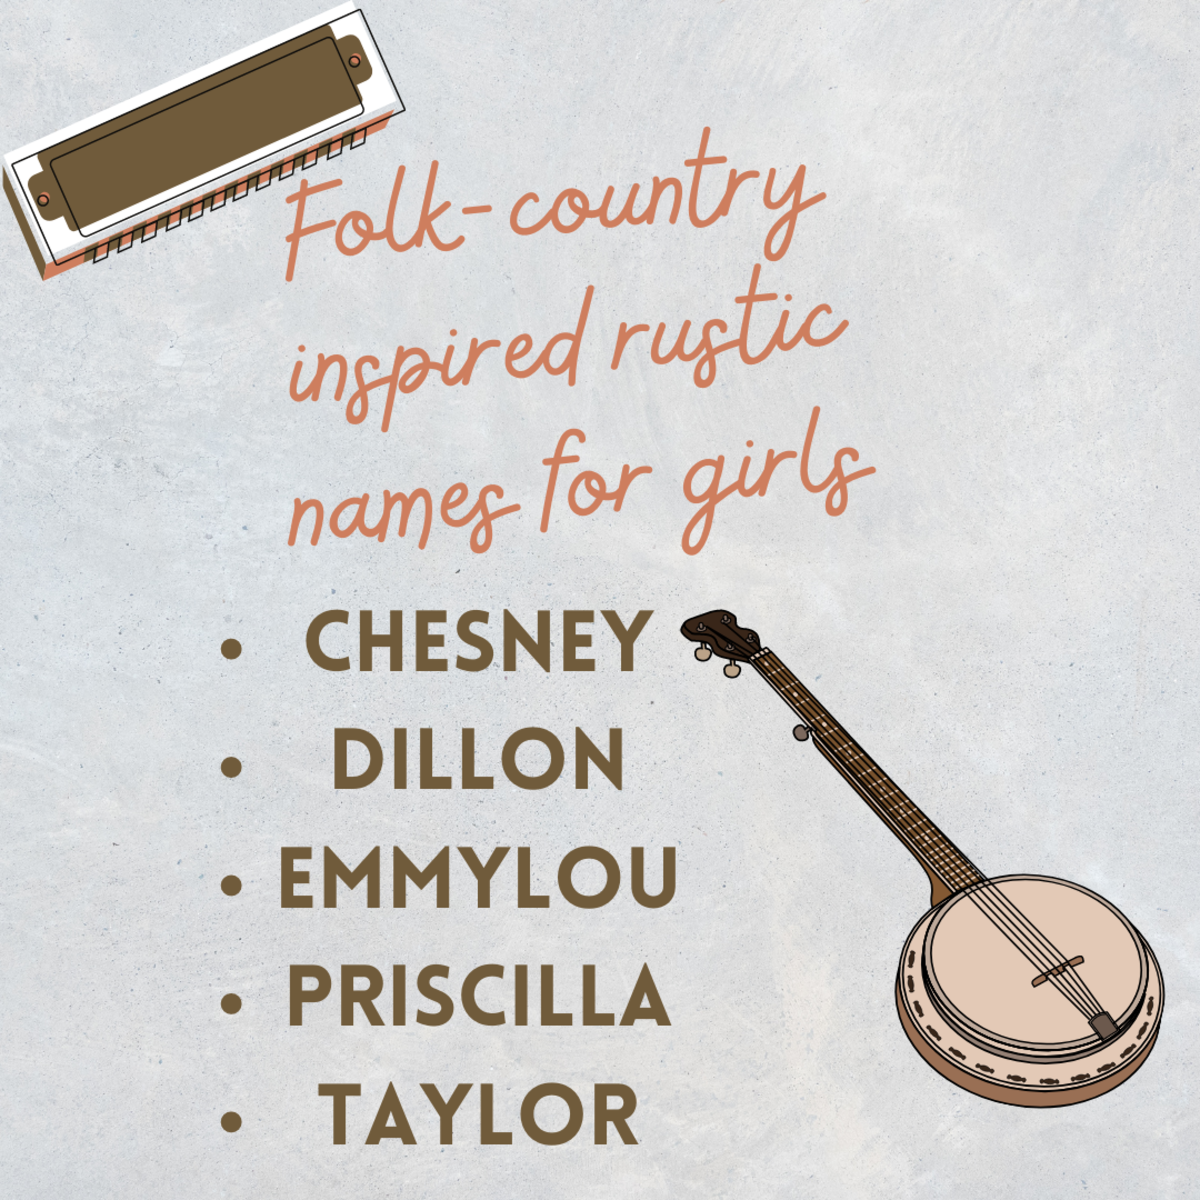 Chesney, Dillon, Emmylou, Priscilla and Taylor are all inspired by American folk and country icons through the years.